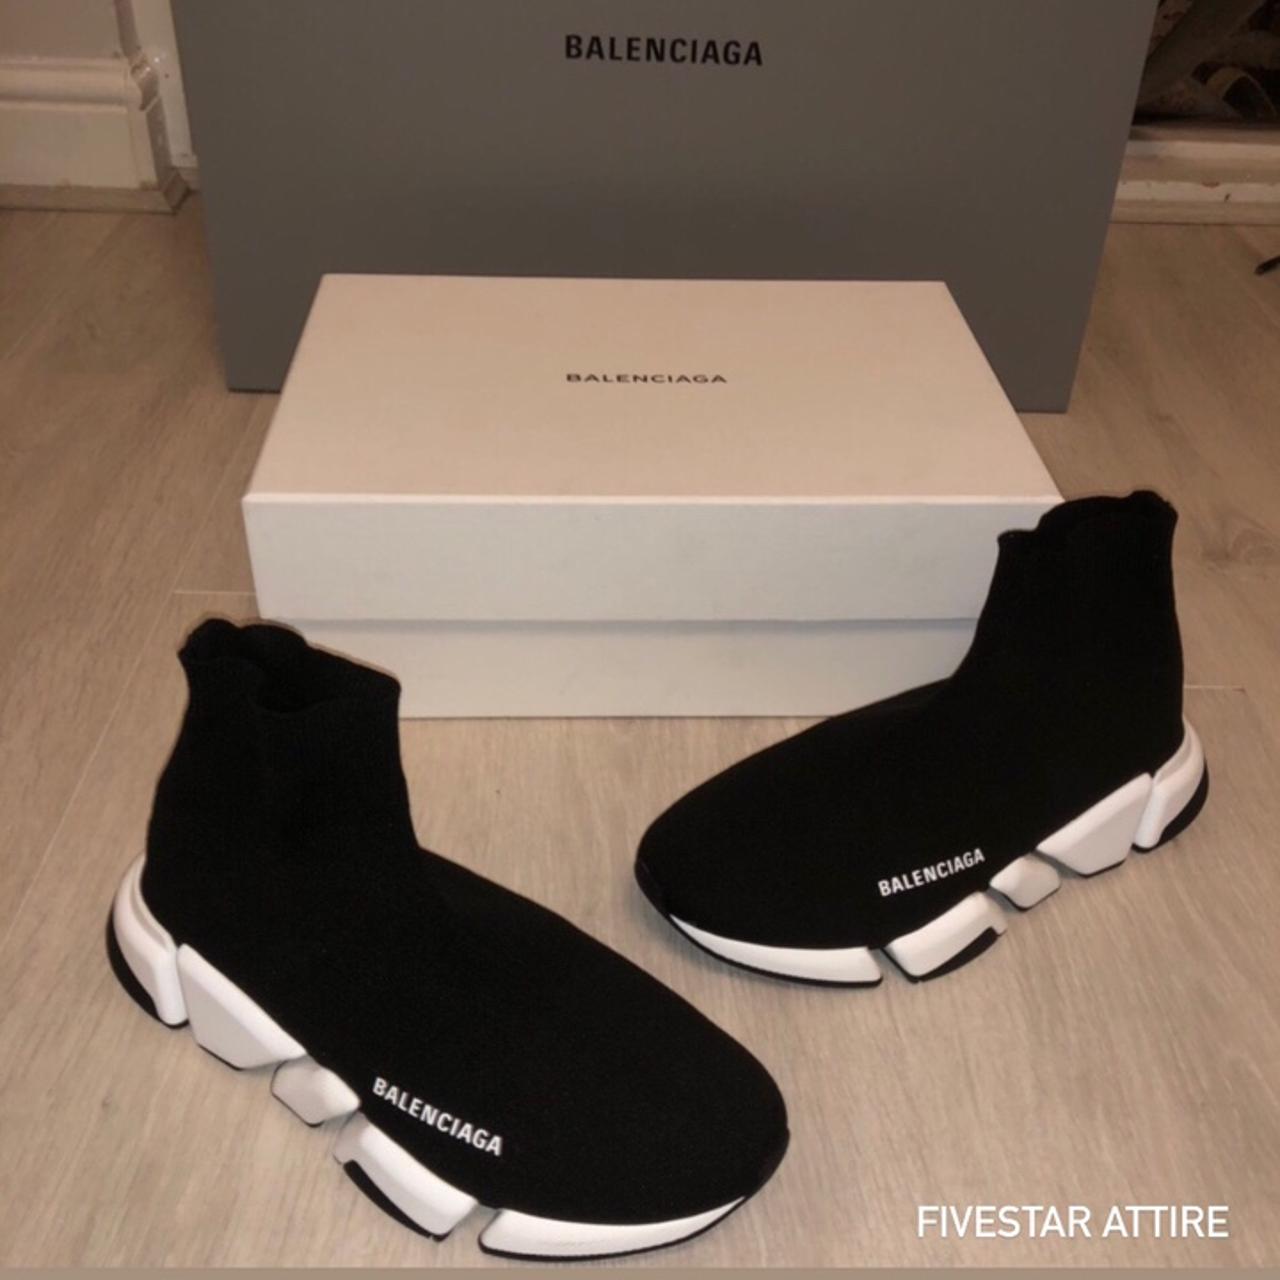 Balenciaga Footwear Is 30 off at Nordstrom  Slides Sock Sneakers Shoes   The Manual